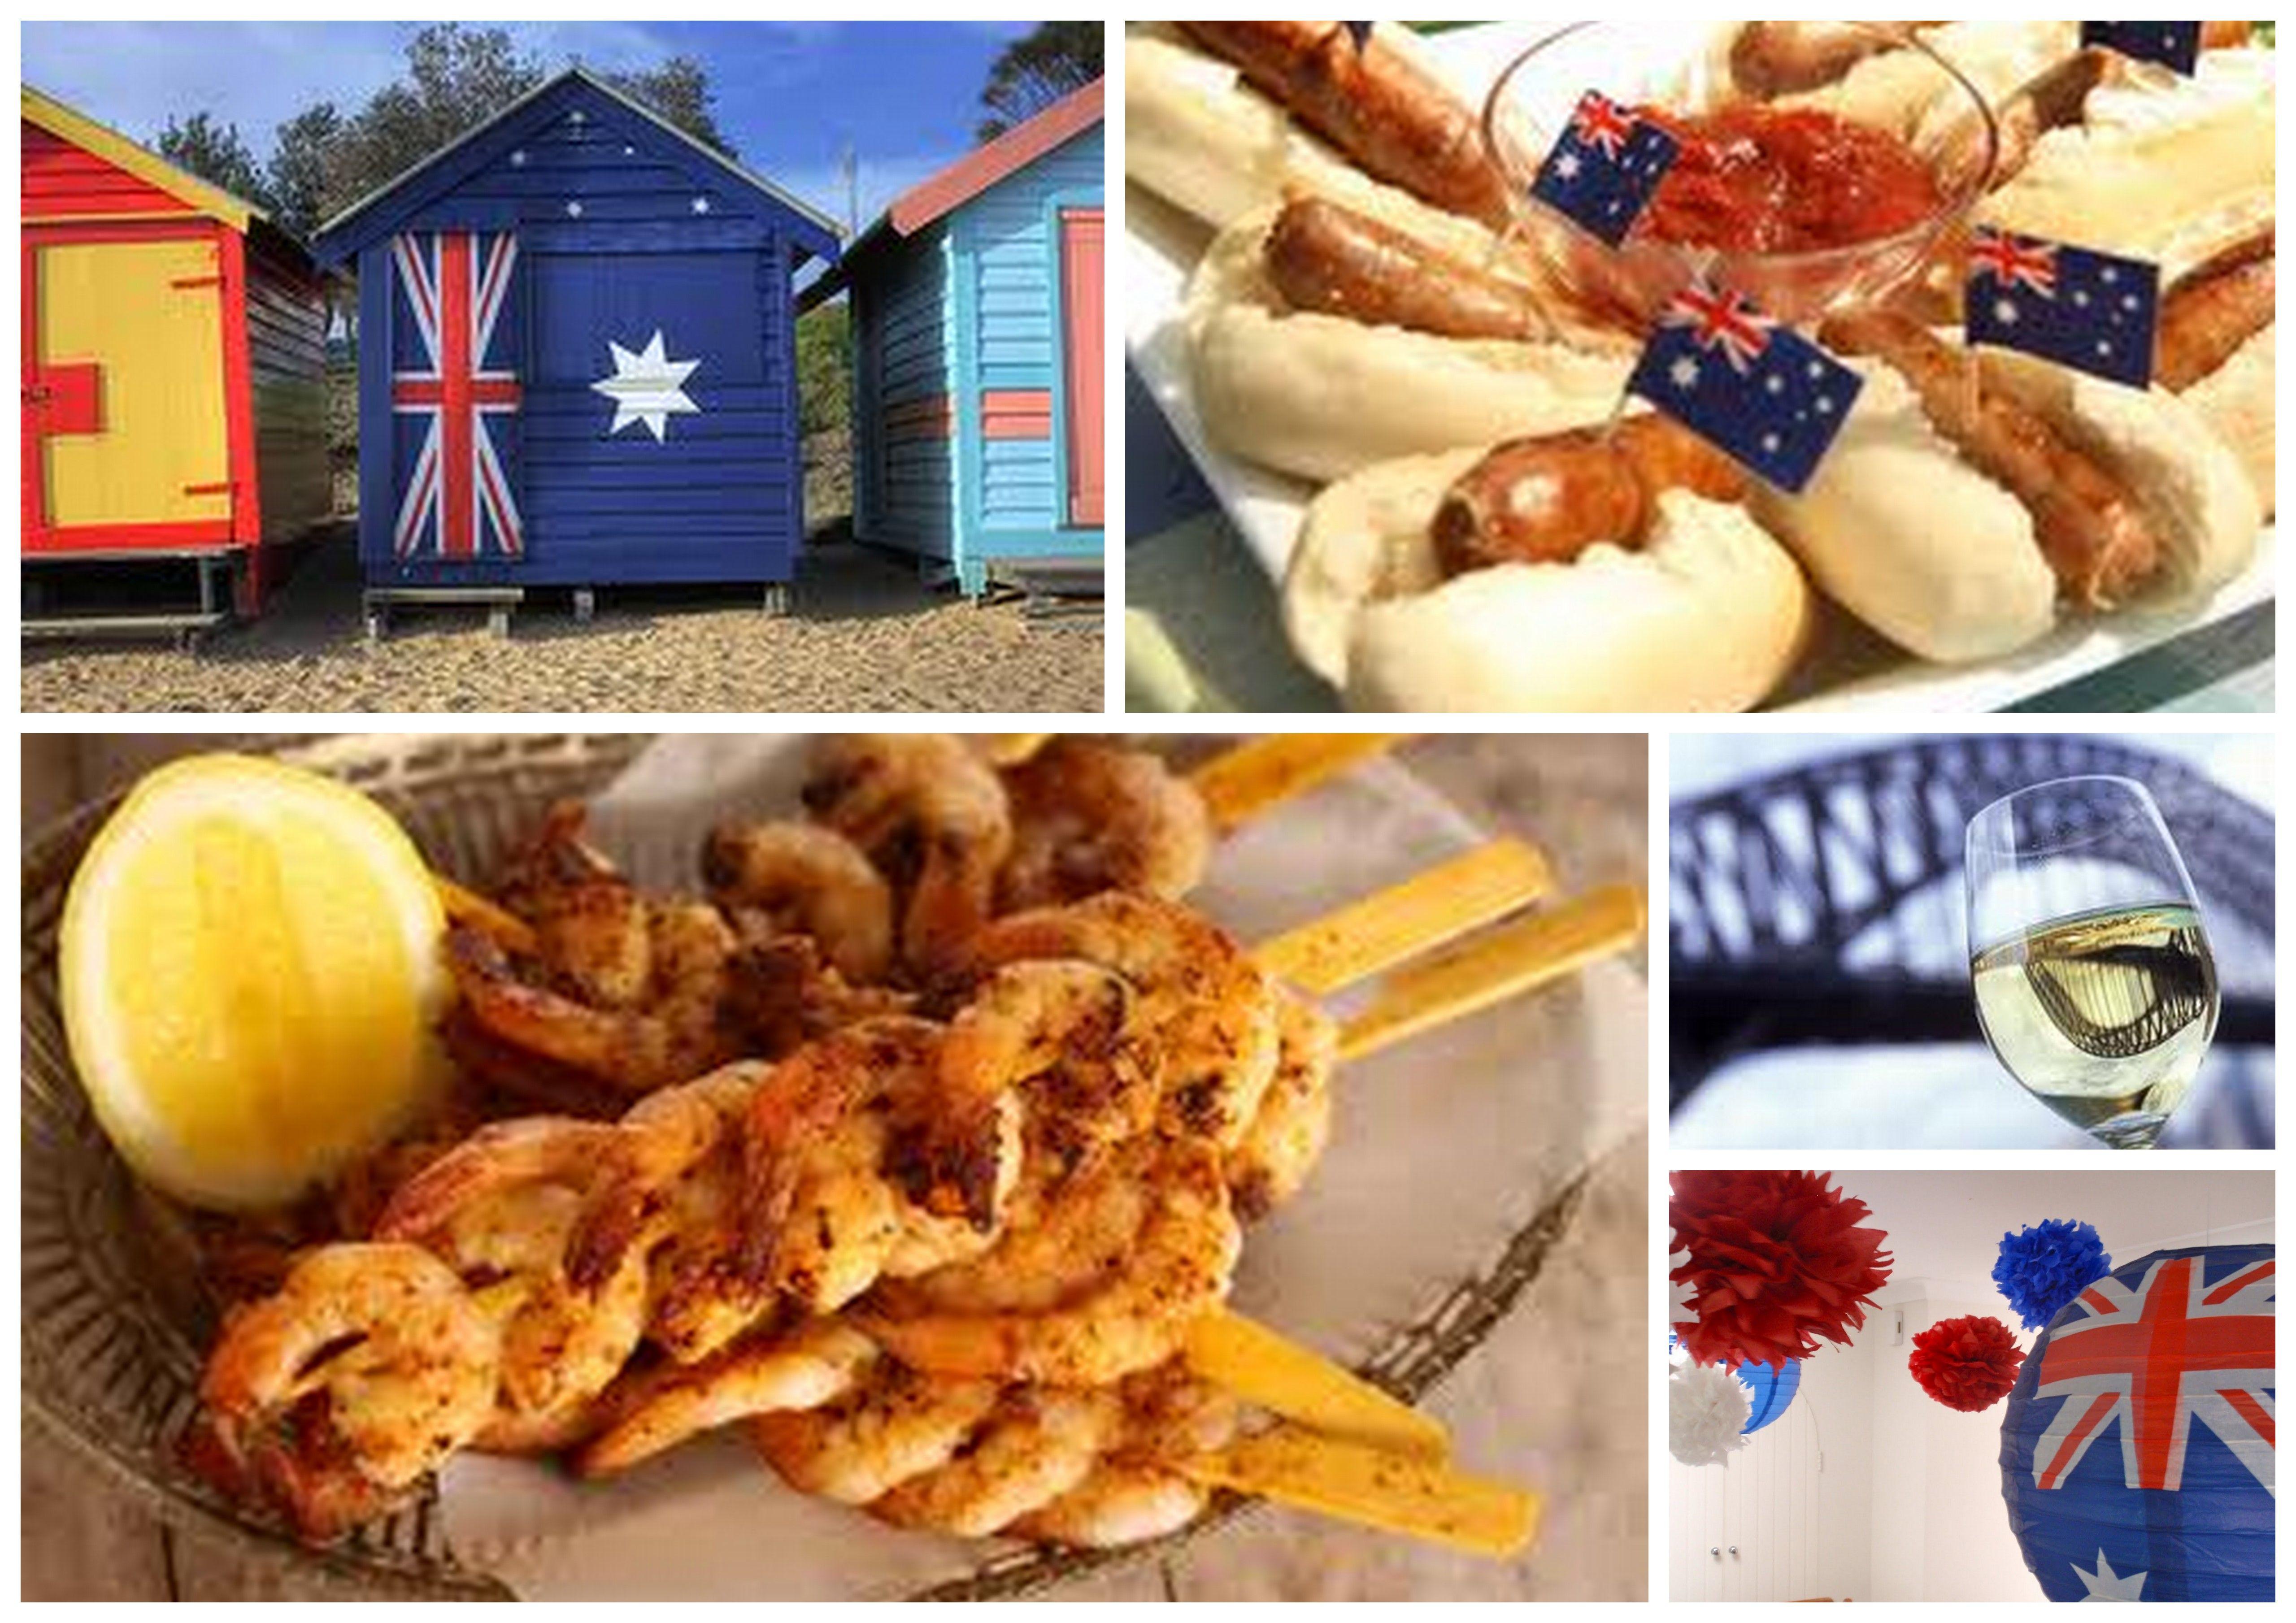 image about Australia Day. Facebook, February